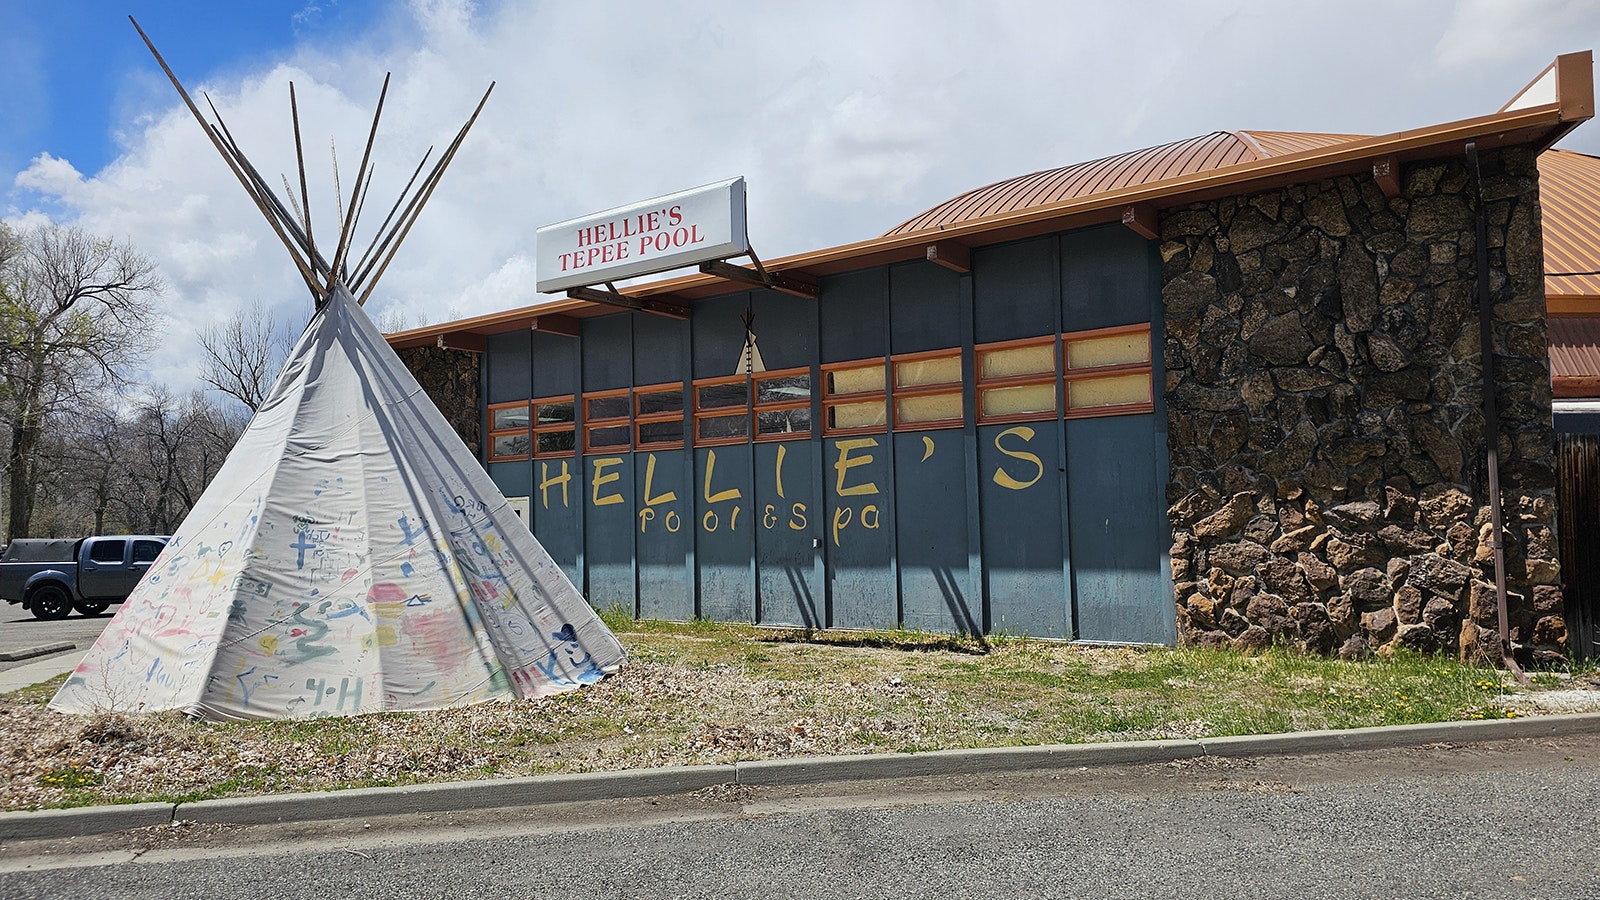 The Teepee Pool would be reconstructed as an adult-oriented spa and wellness center. It is already owned by Wyoming LLC.